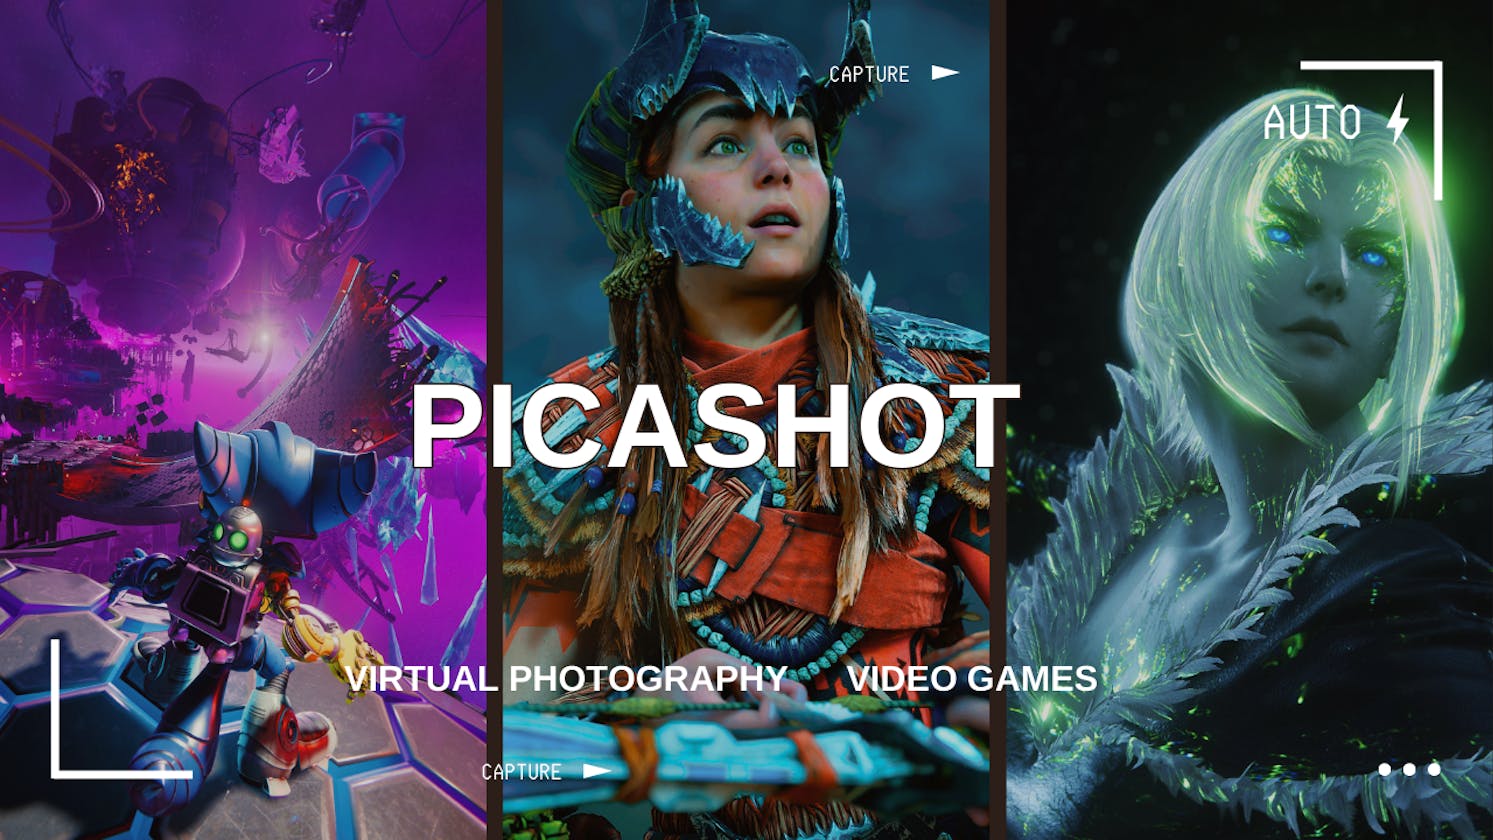 We made Picashot even better for your gaming photos